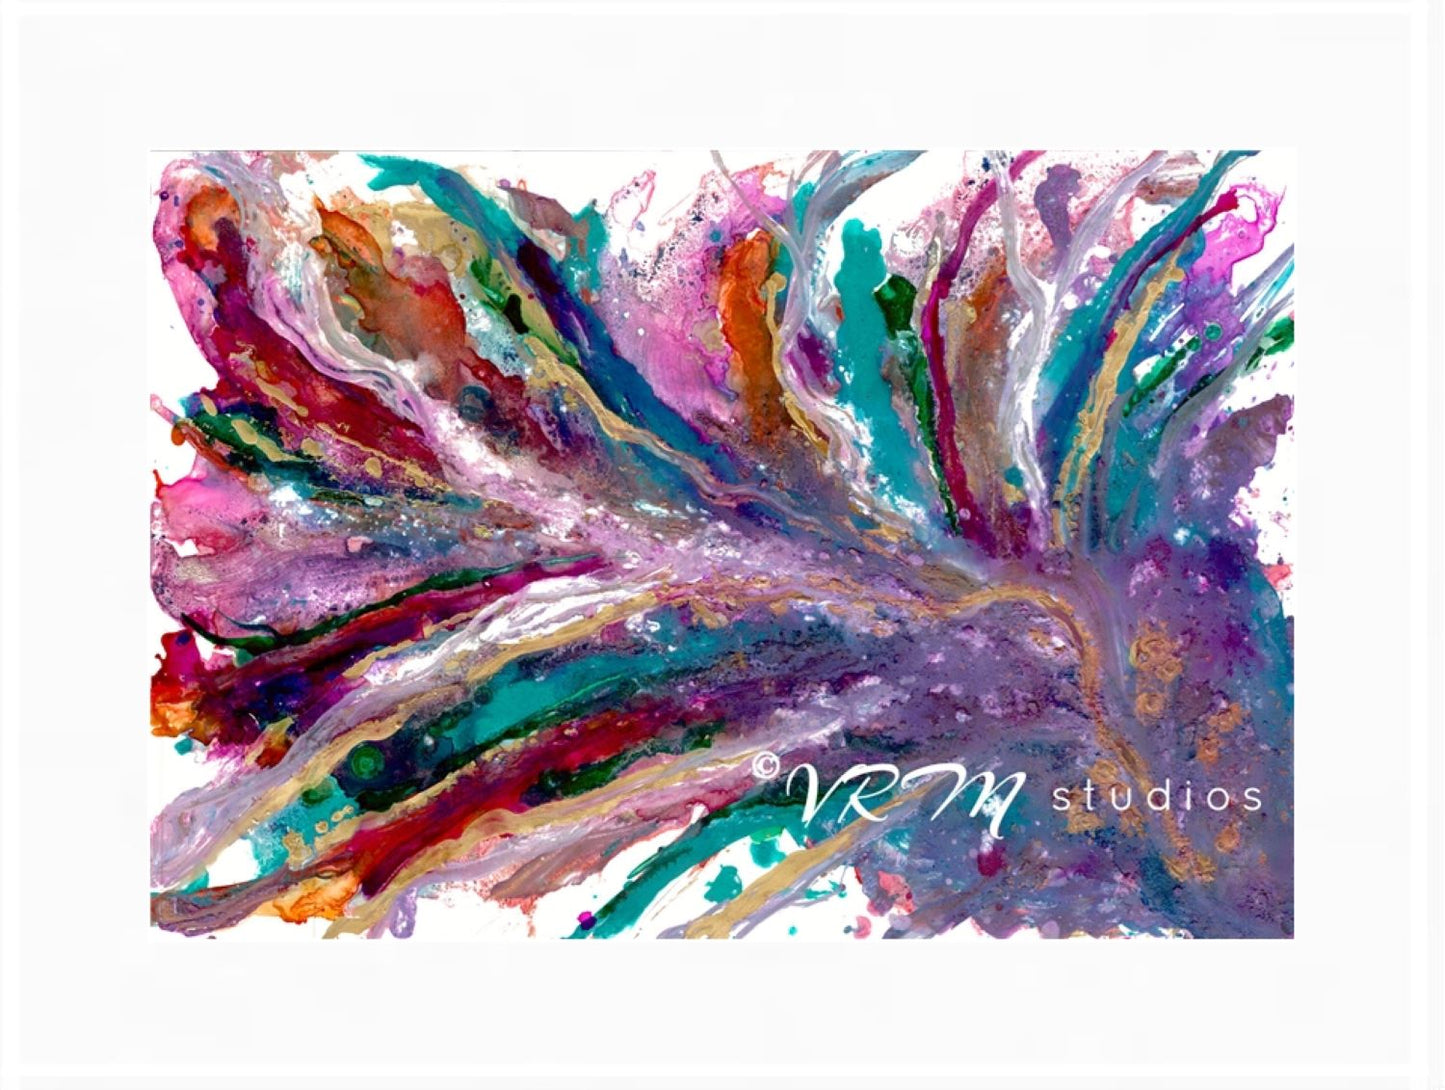 Fabulous Feather, original fluid art painting on photo paper, matted, 18x24 inches